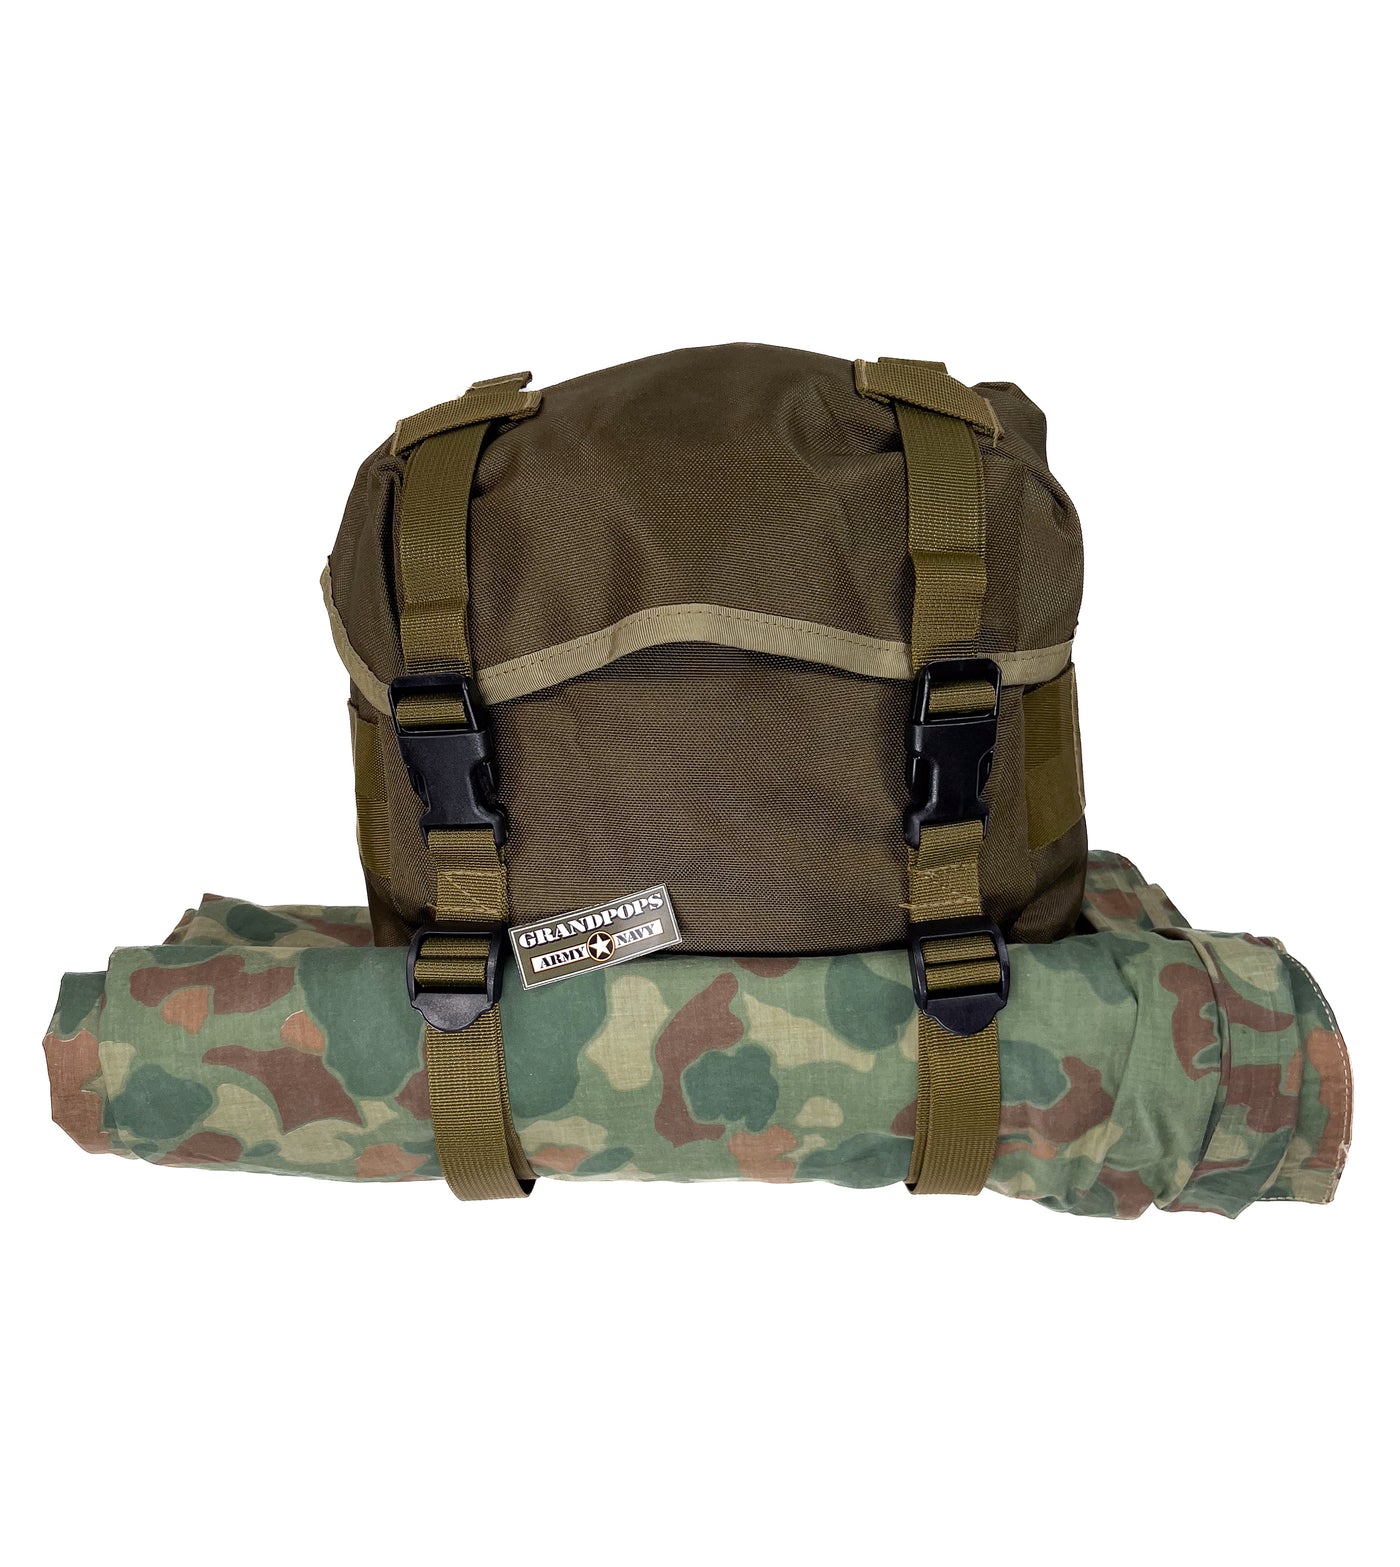 U.S. Military Tactical Olive Drab M67 Field Butt Pack Repro